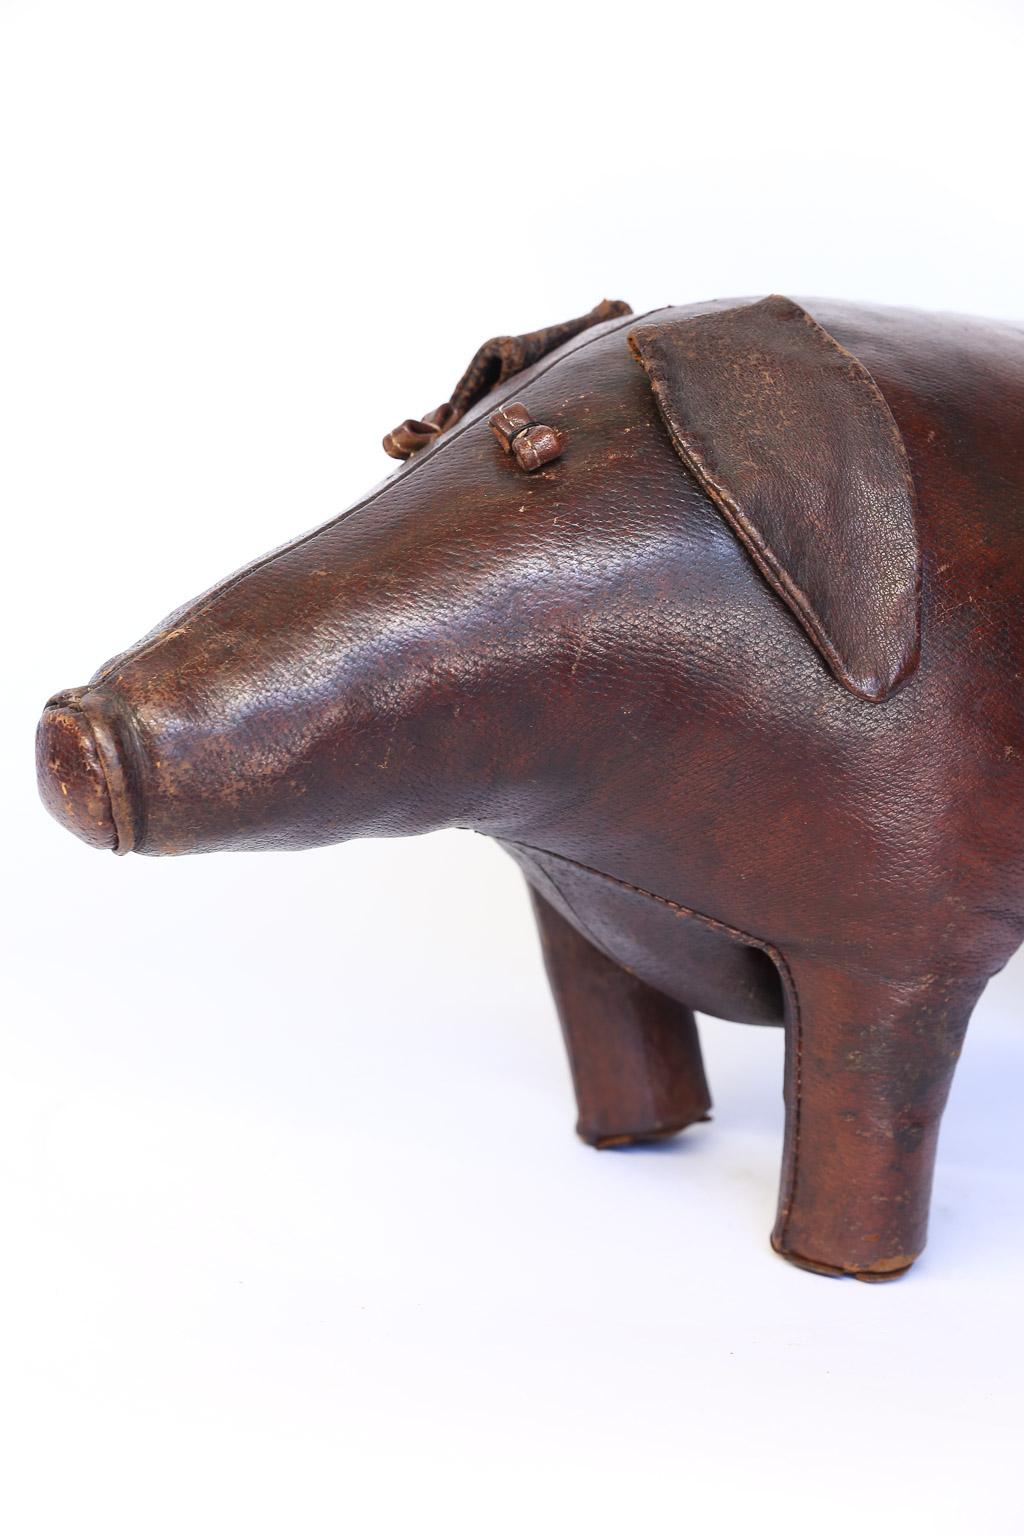 Beautiful leather footstool by Dimitri Omersa in the shape of a pig. Omersa Co., England, produced several leather animals as footstools for Abercrombie and Fitch. This sweet pig is a wonderful conversation piece and useful as a footstool.